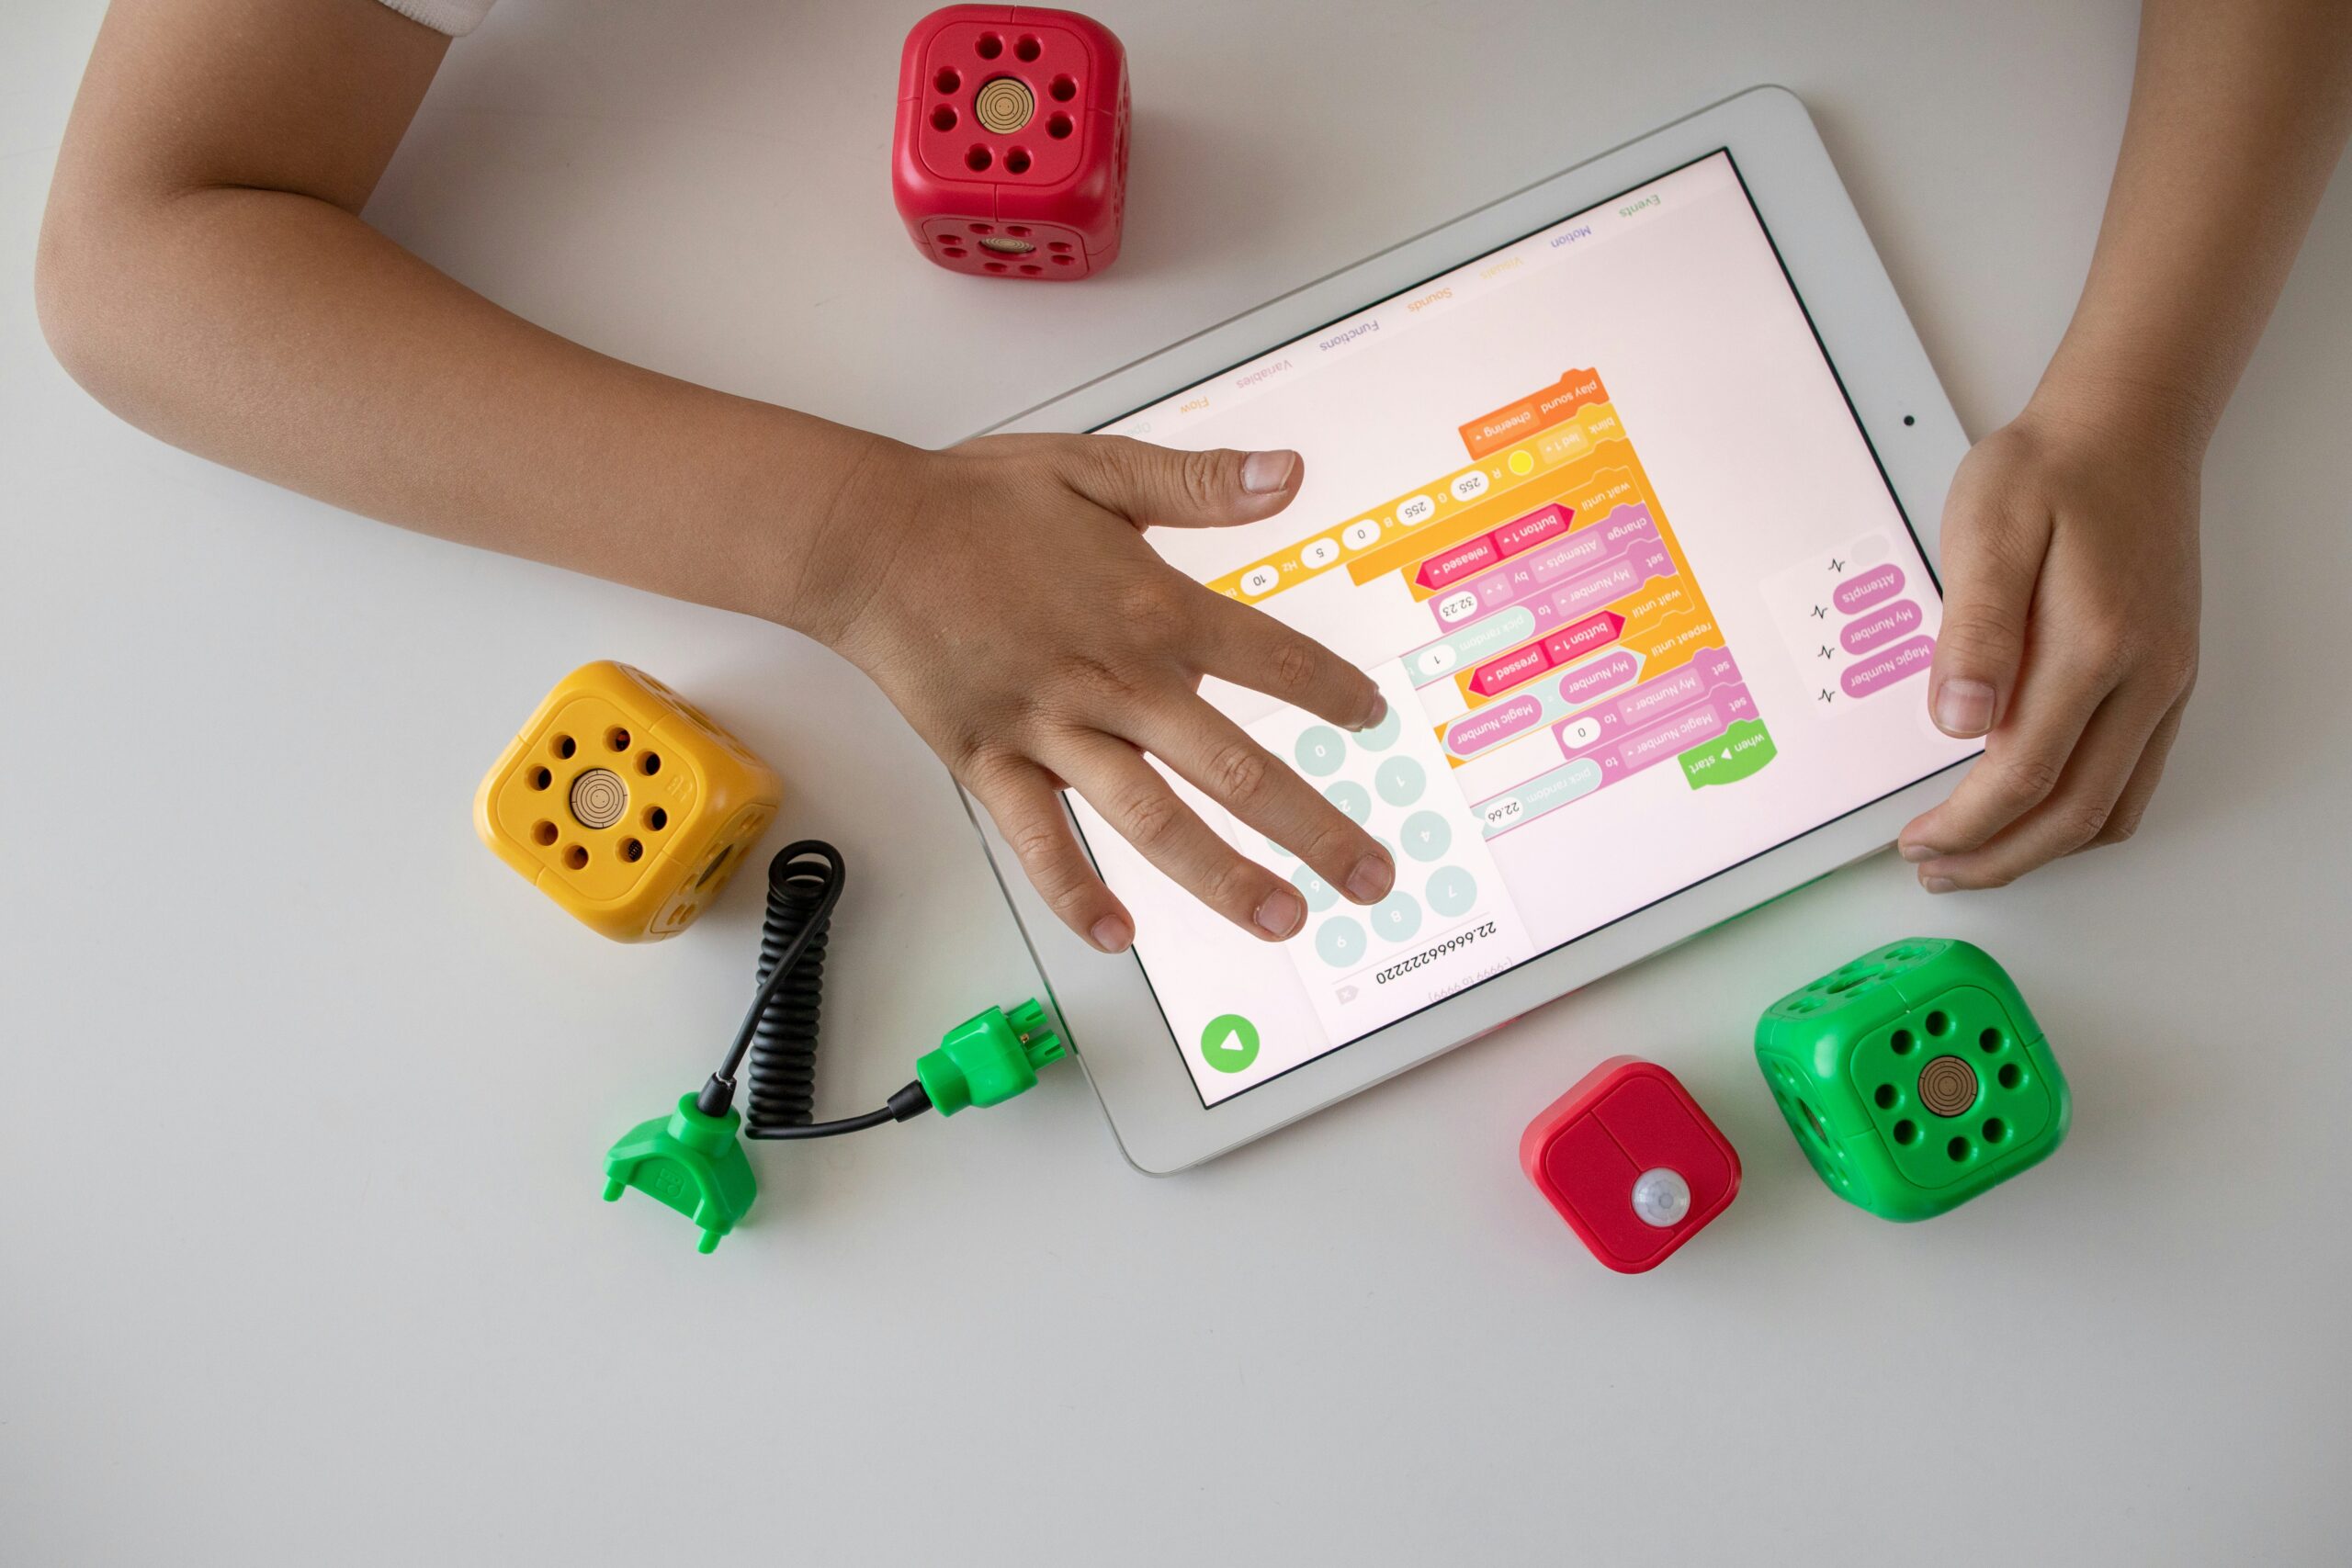 a birds eye view of some hands on an ipad which displays coding software for kids.